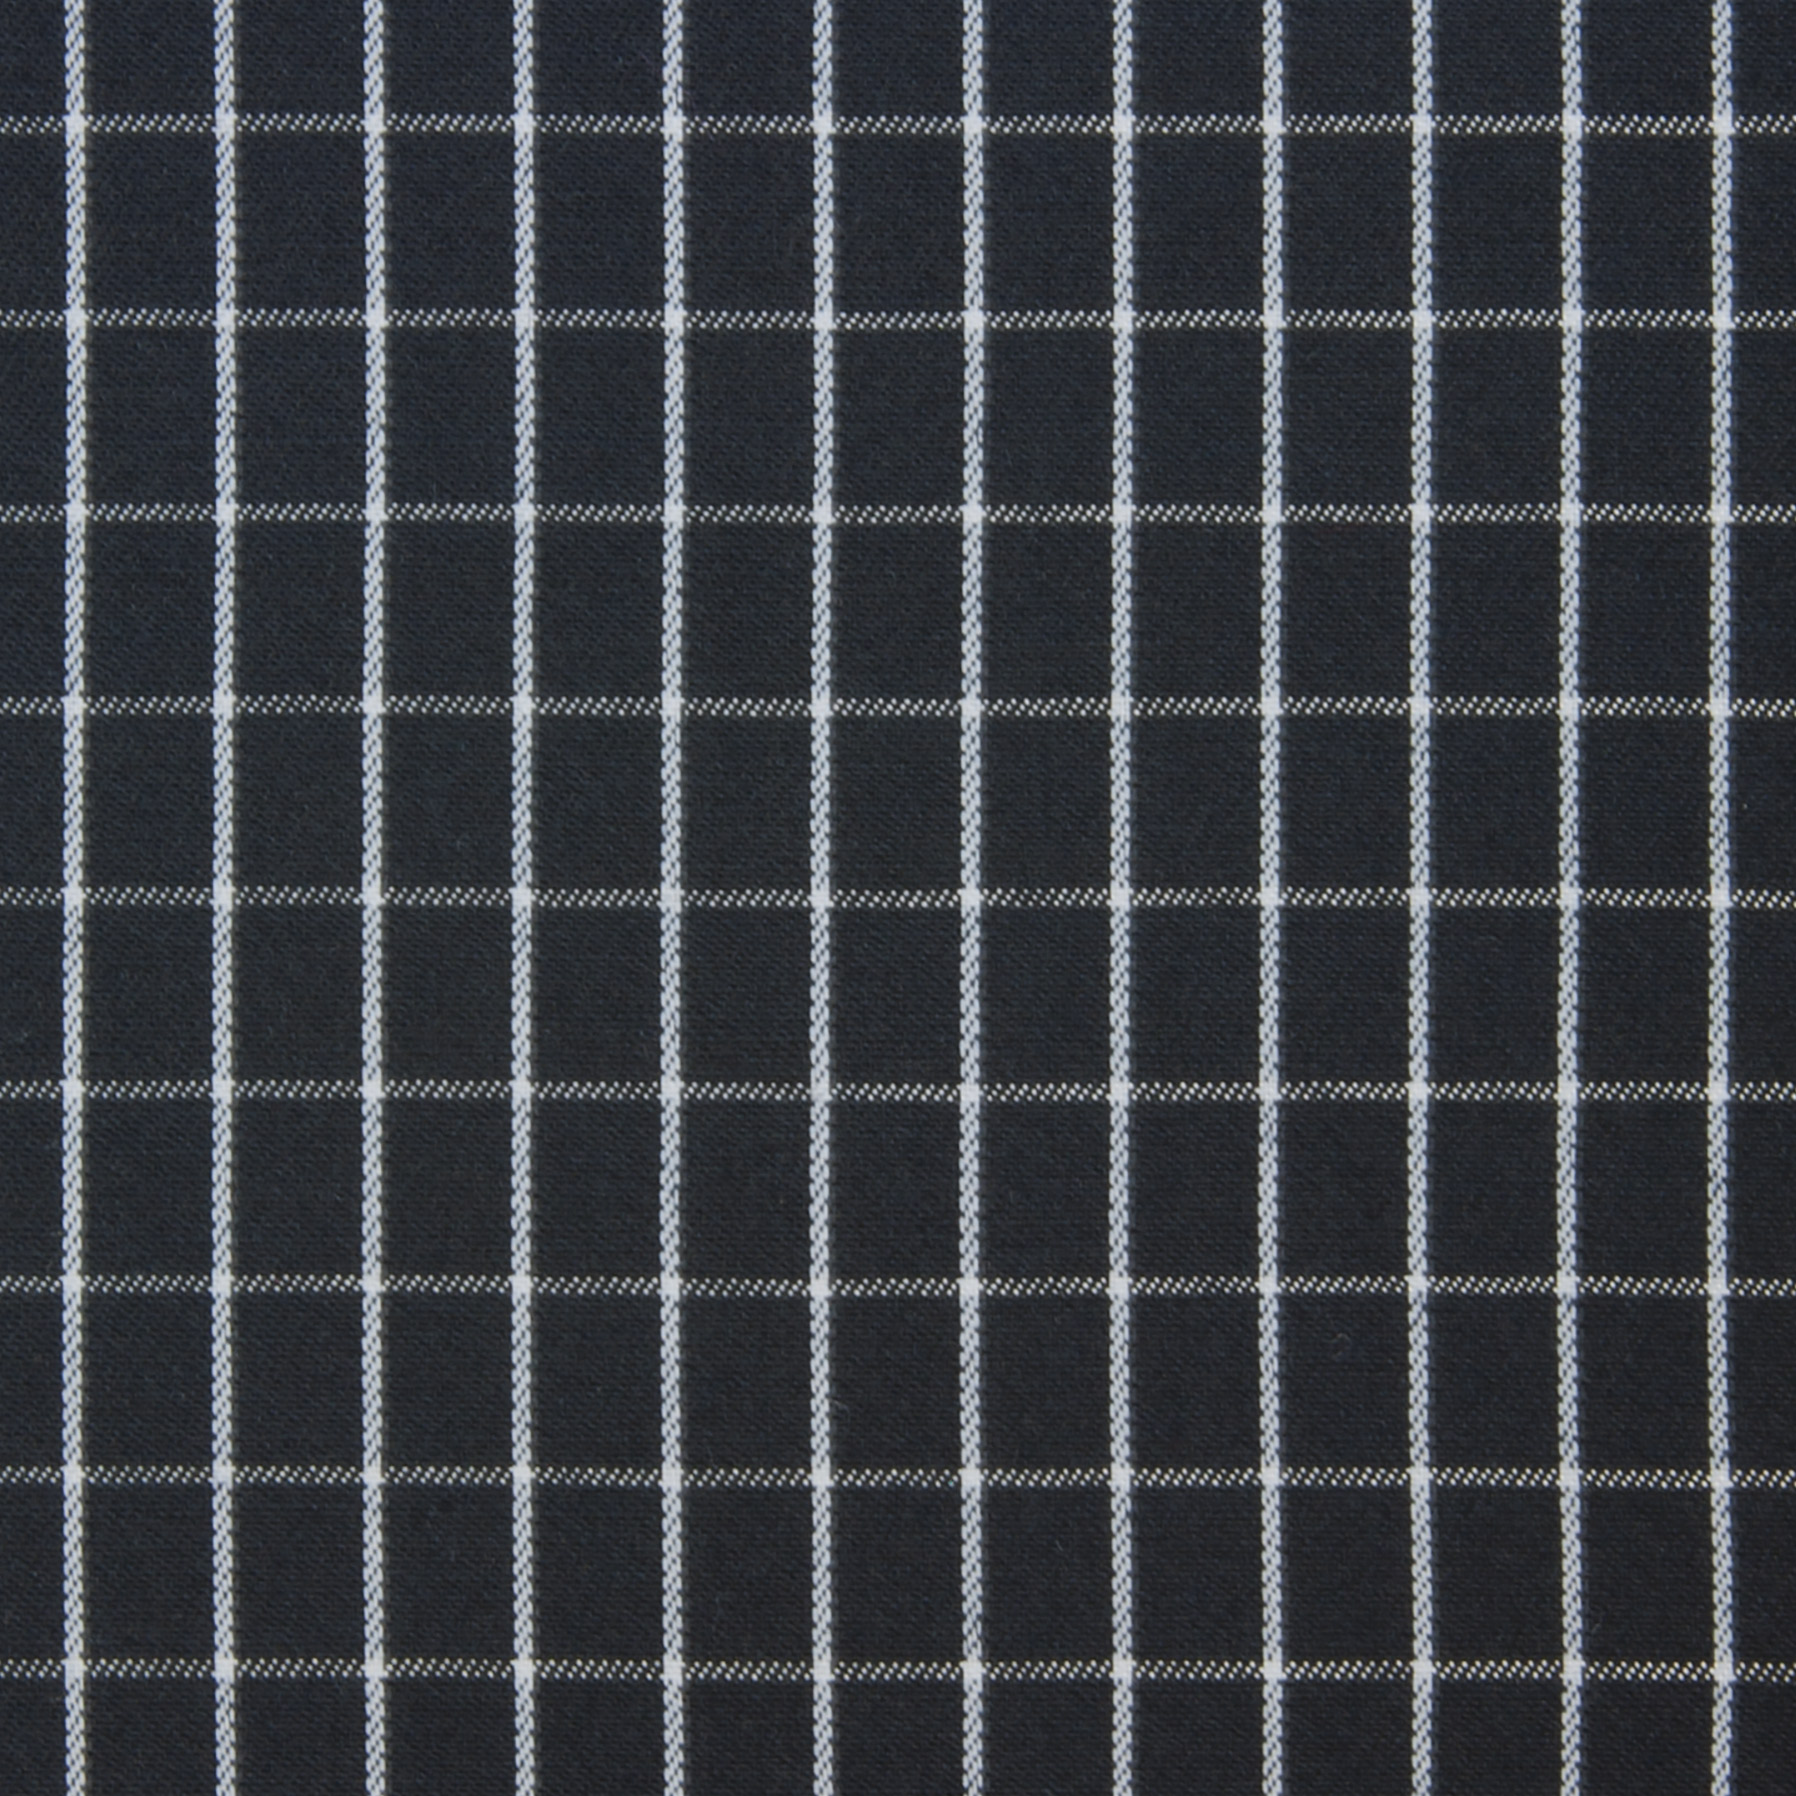 Buy tailor made shirts online - Arturo Collection - White Check on Black